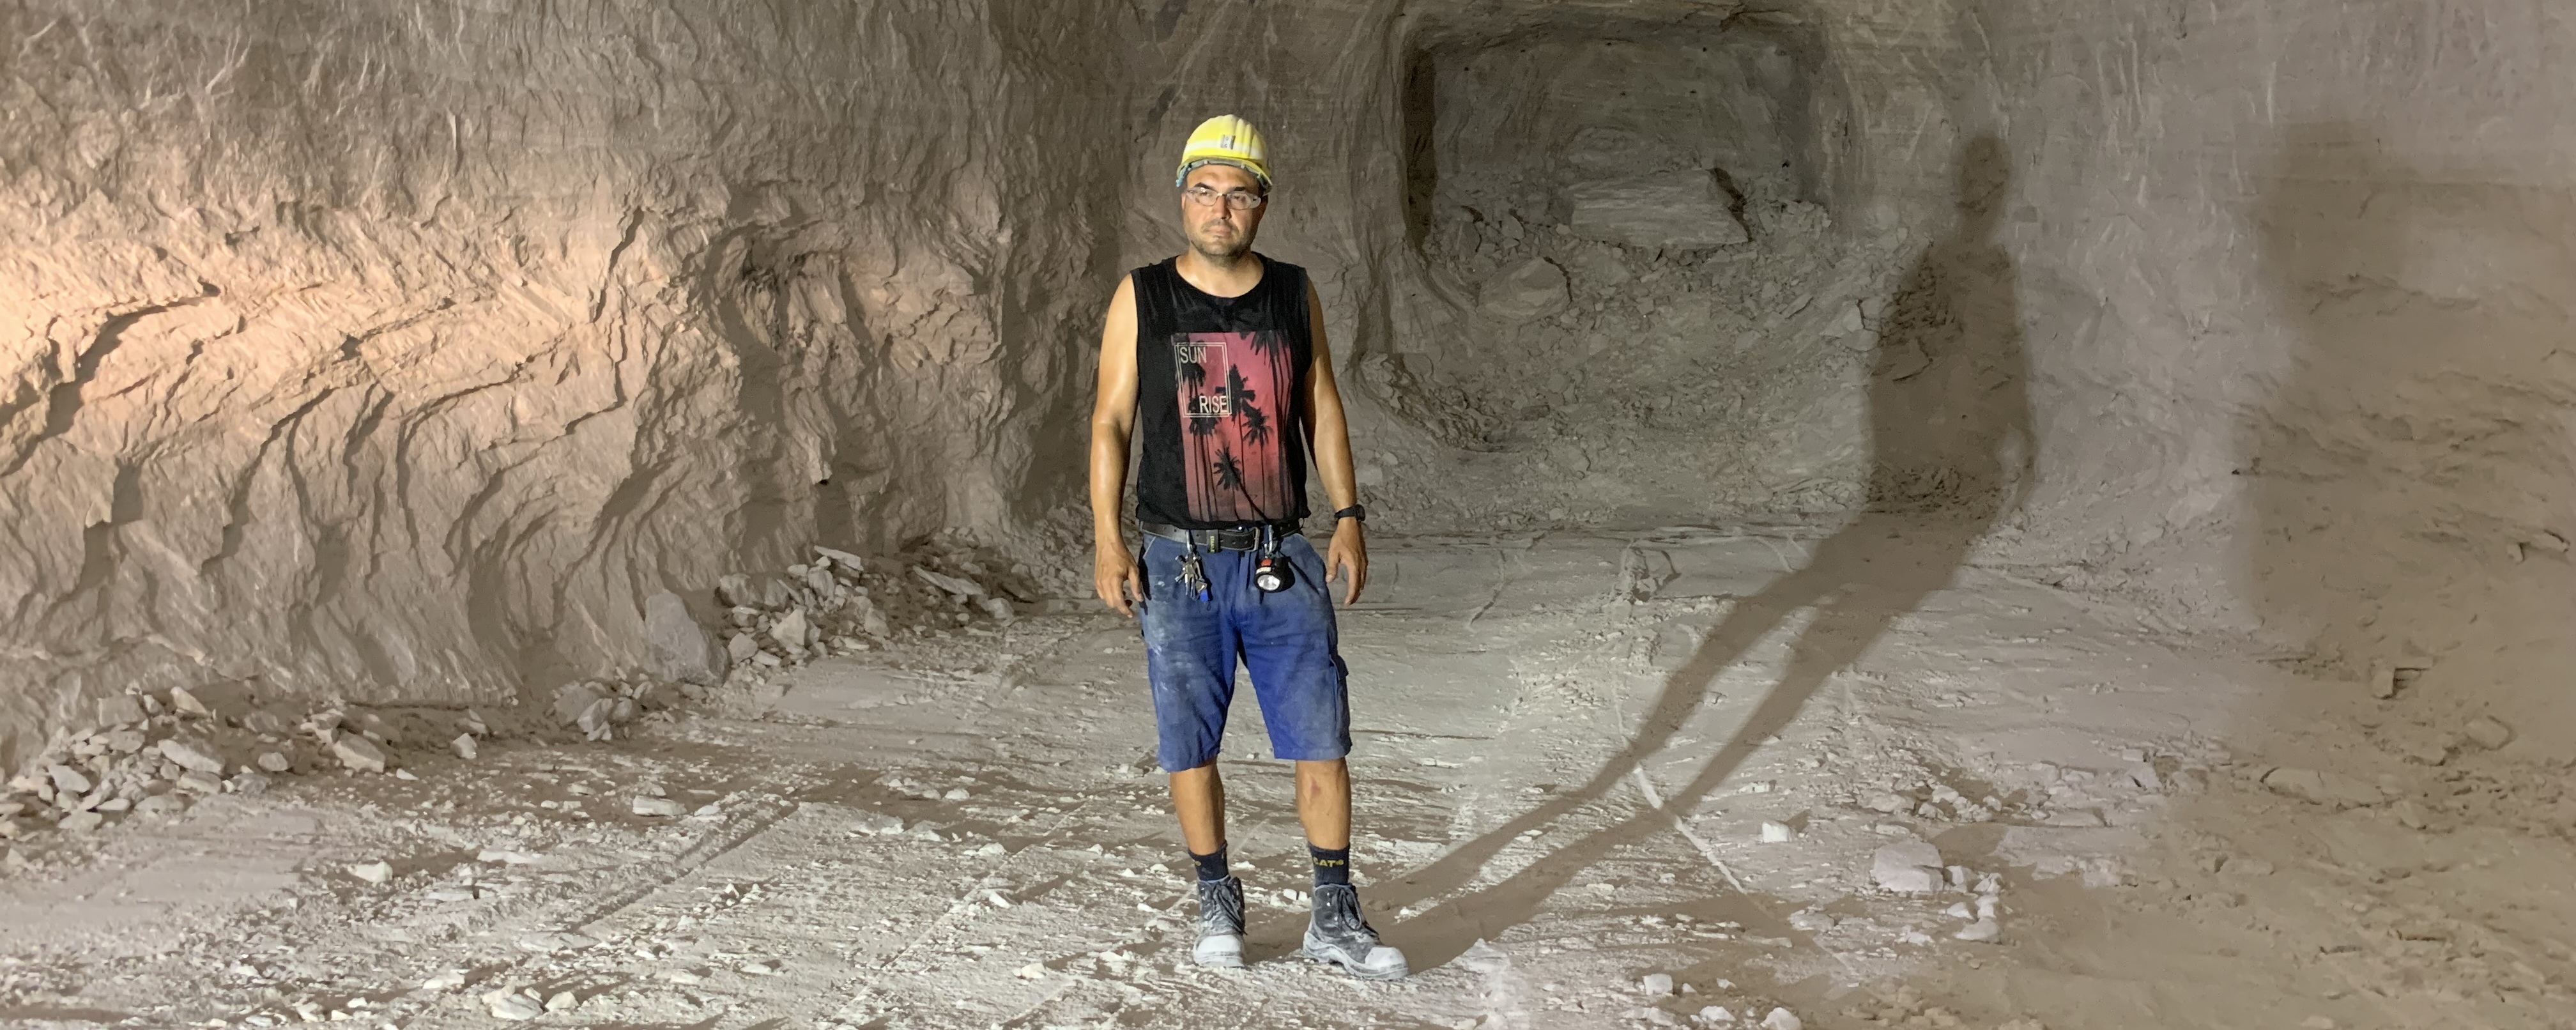 Steffen Quaas at the currently deepest point in the Zielitz mine at a depth of around 1,400 meters. Here, the air temperature sometimes exceeds 50 degrees Celsius. 